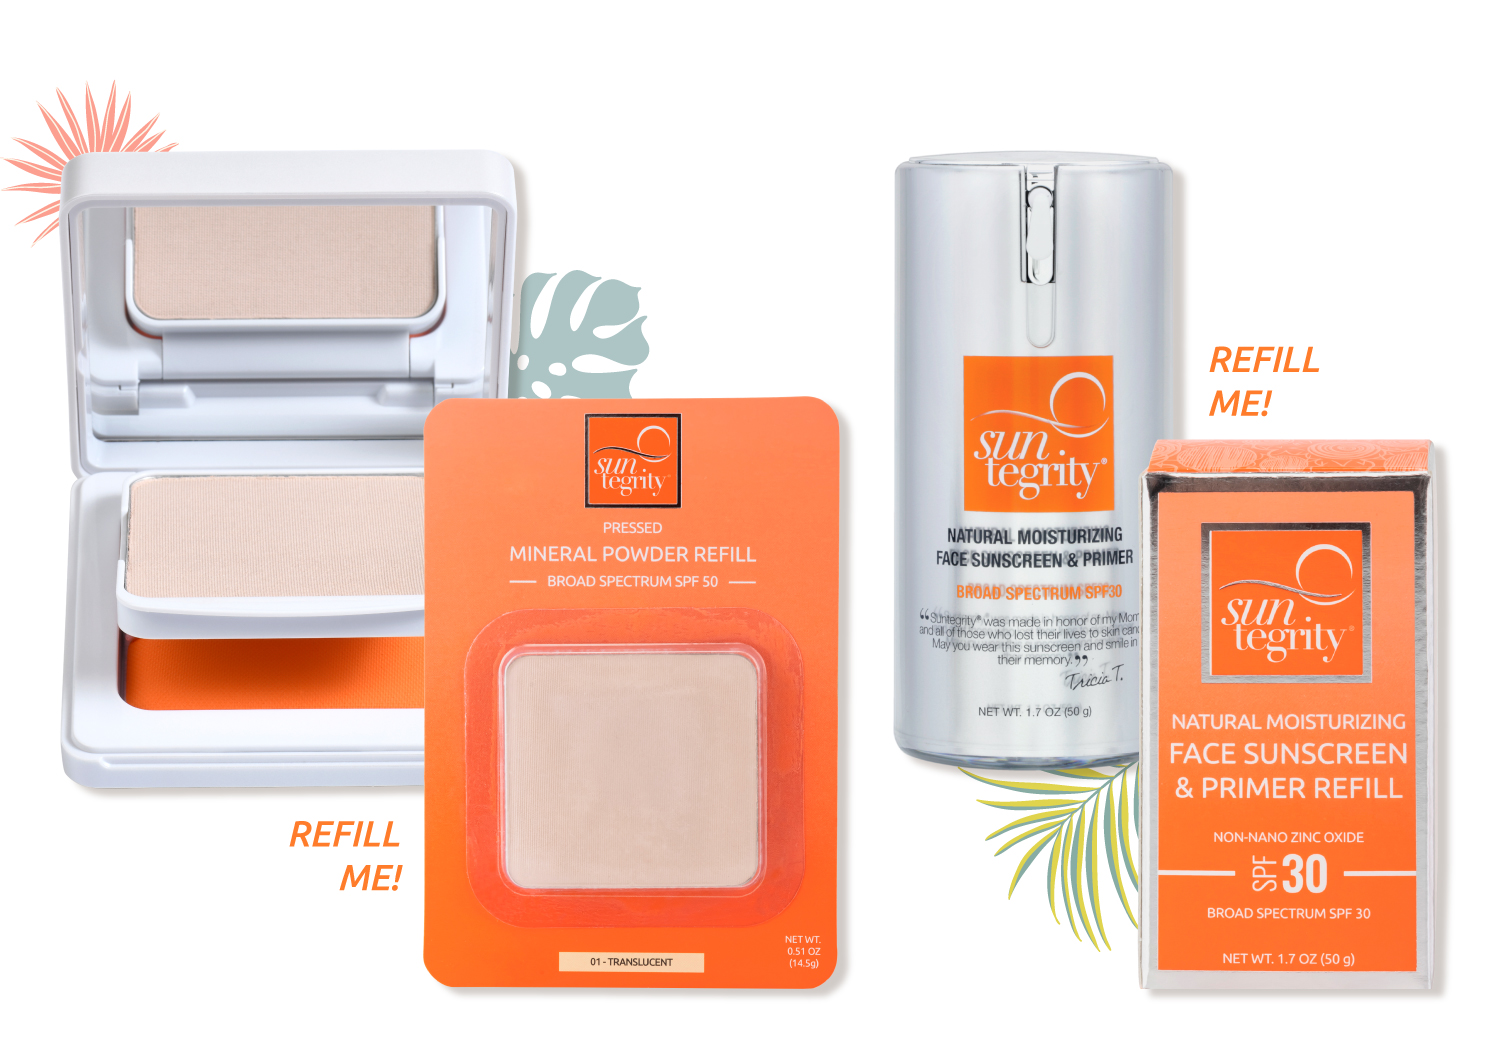 Image: Refill options available for Mineral Pressed Powder and Natural Moisturizing Face Sunscreen & Primer